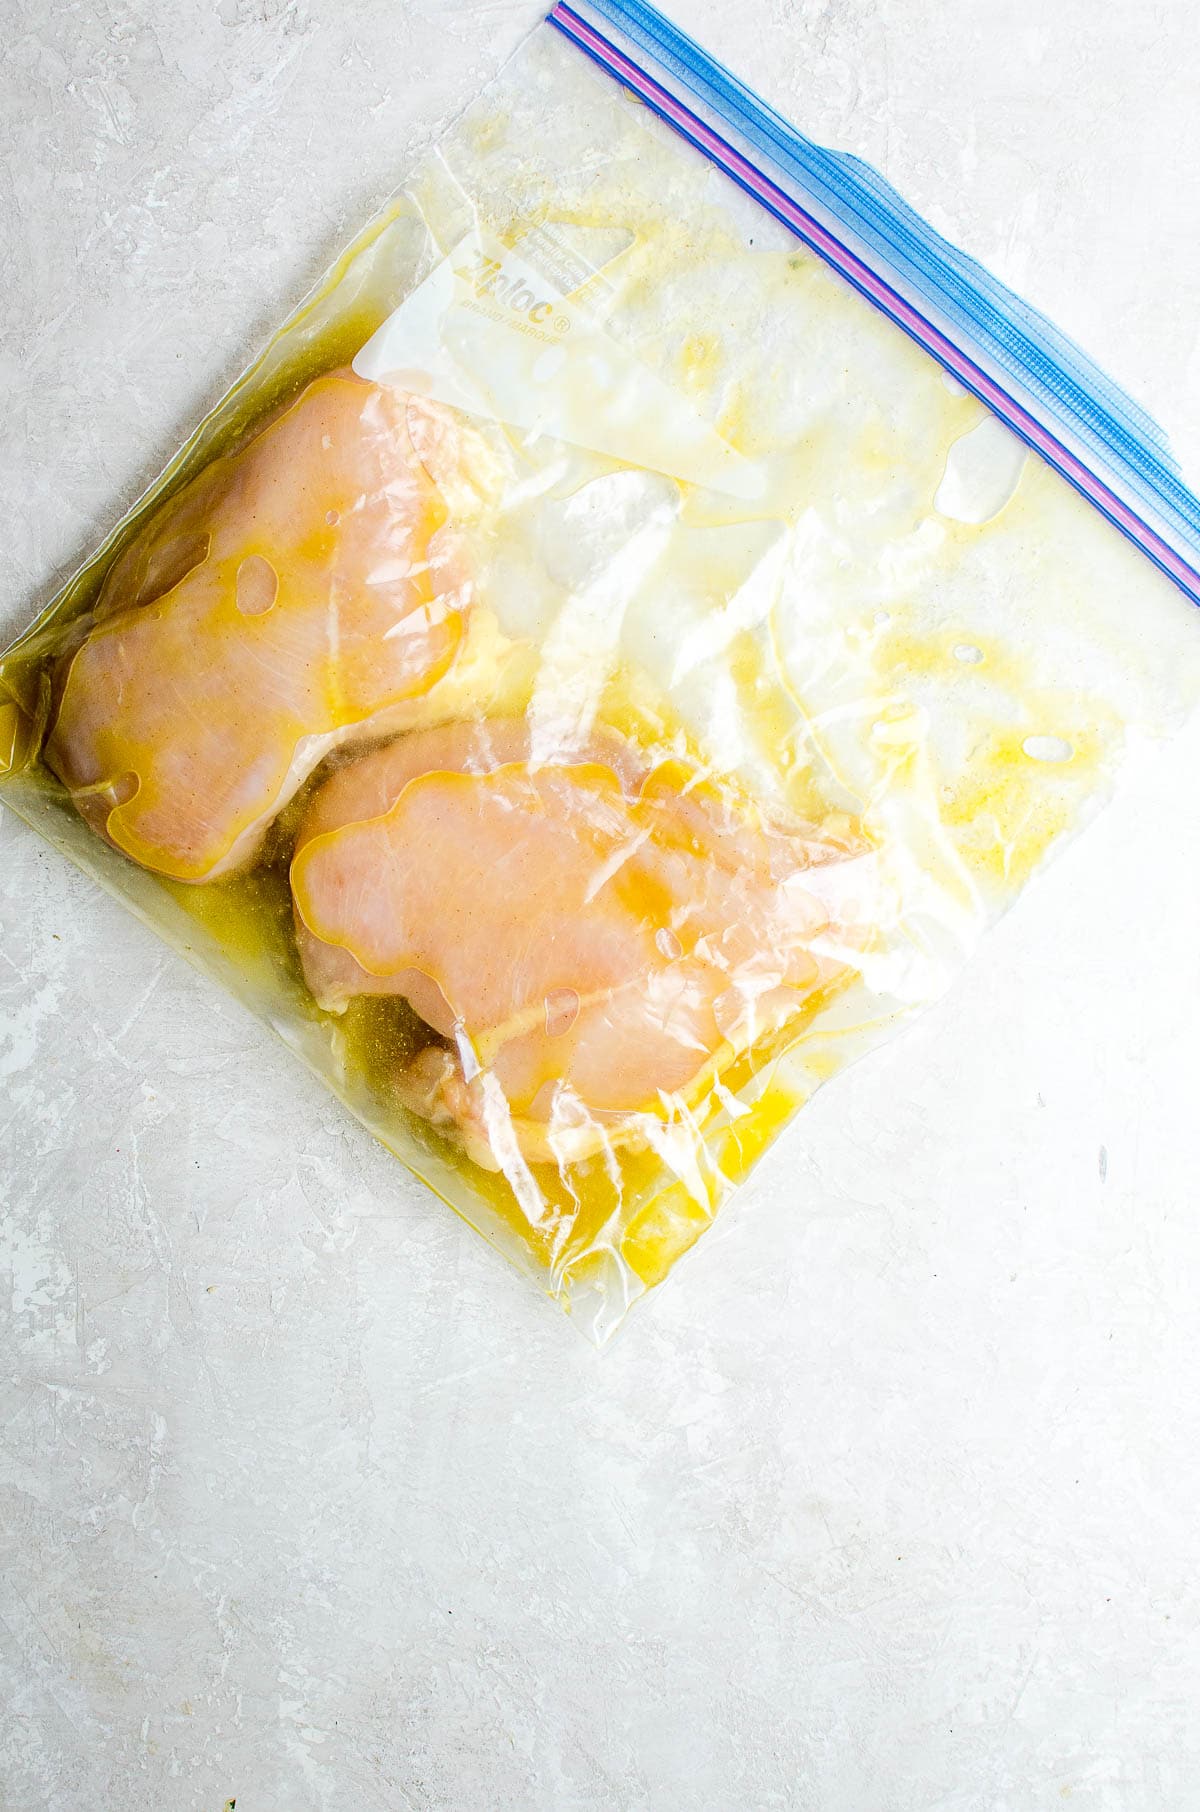 A bag of marinating chicken breasts.